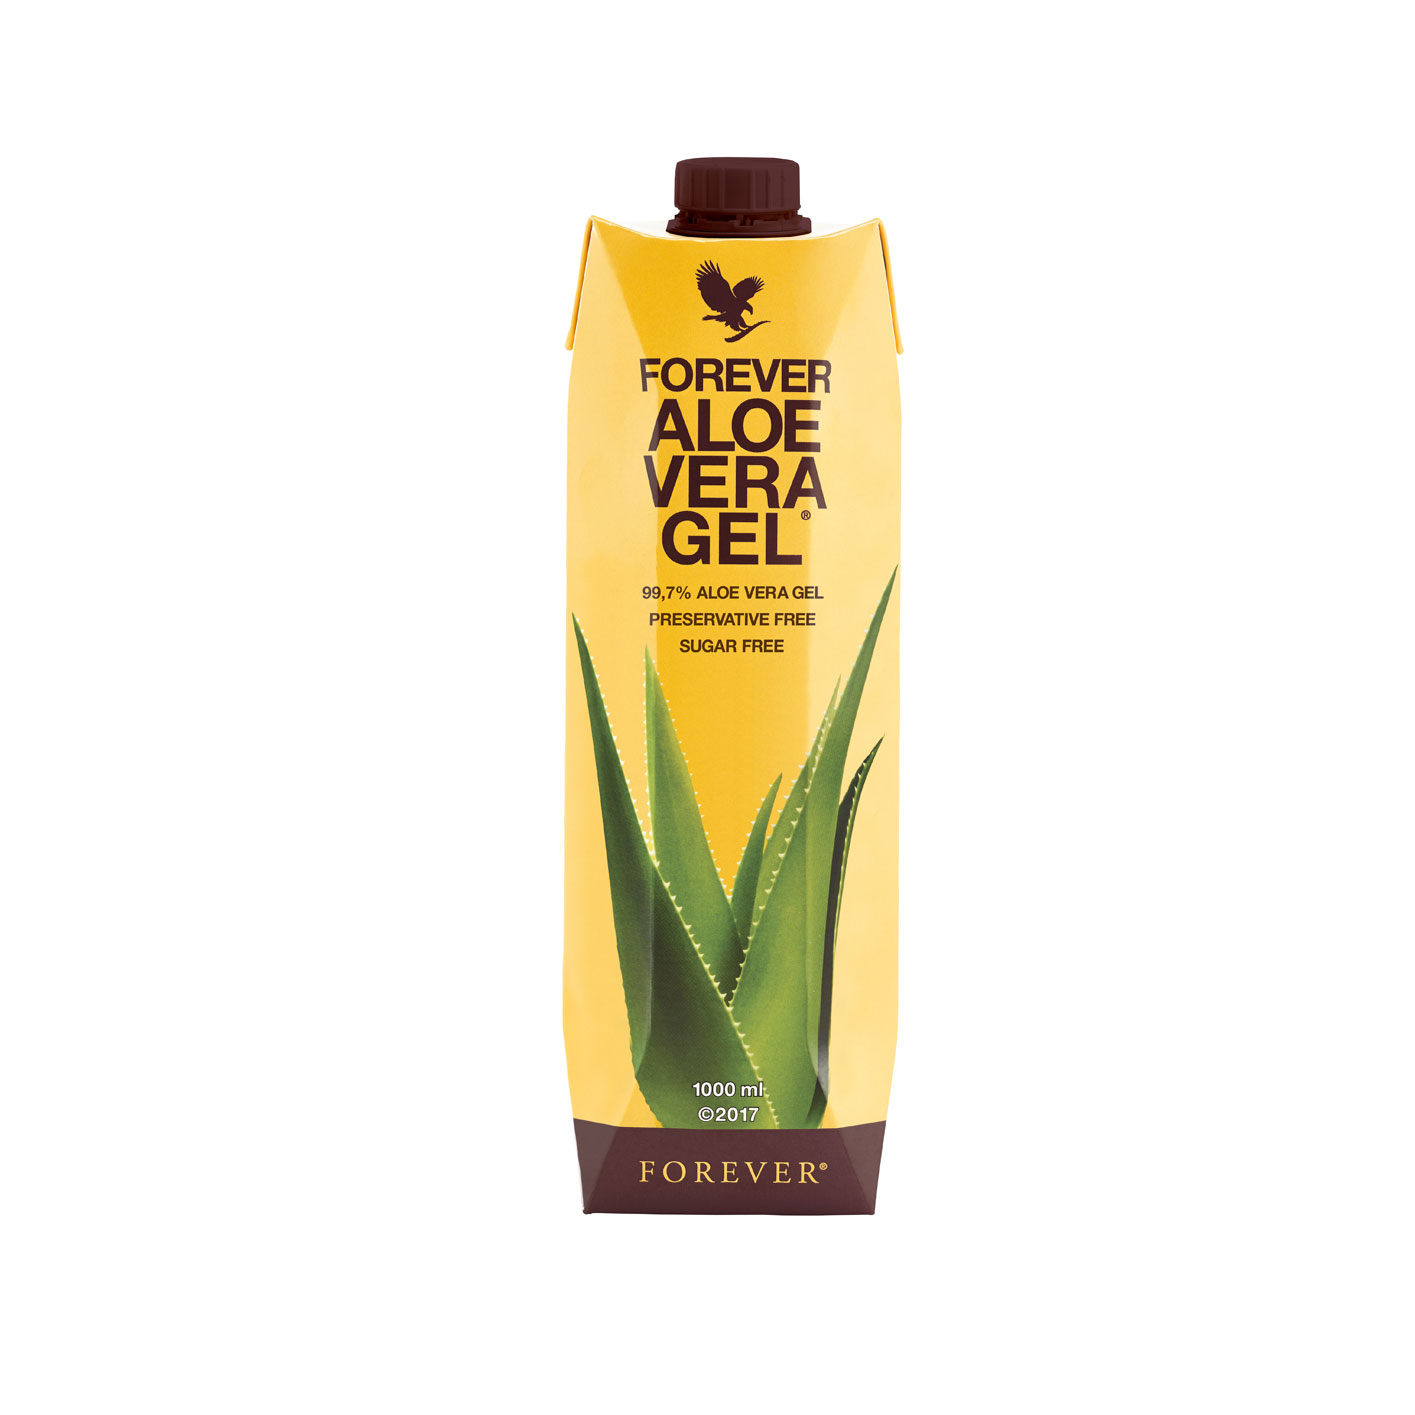 Our aloe vera is cultivated on fertile soils in a climate that enjoys over 2,000 hours of sunshine a year, and itâ€™s even been certified by the International Aloe Science Council for its purity. This new drinking gel is as close to the real thing as you can get, boasting 99.7% inner leaf aloe gel, lovingly extracted by hand so that you can experience the true power of nature. This purifying gel now also contains vitamin C which contributes to the normal function of the immune system and to a normal energy-yielding metabolism.
<b>Warning</b>
If you are pregnant, breastfeeding, planning pregnancy, taking any medications or are under medical supervision, please consult a doctor or healthcare professional before use.